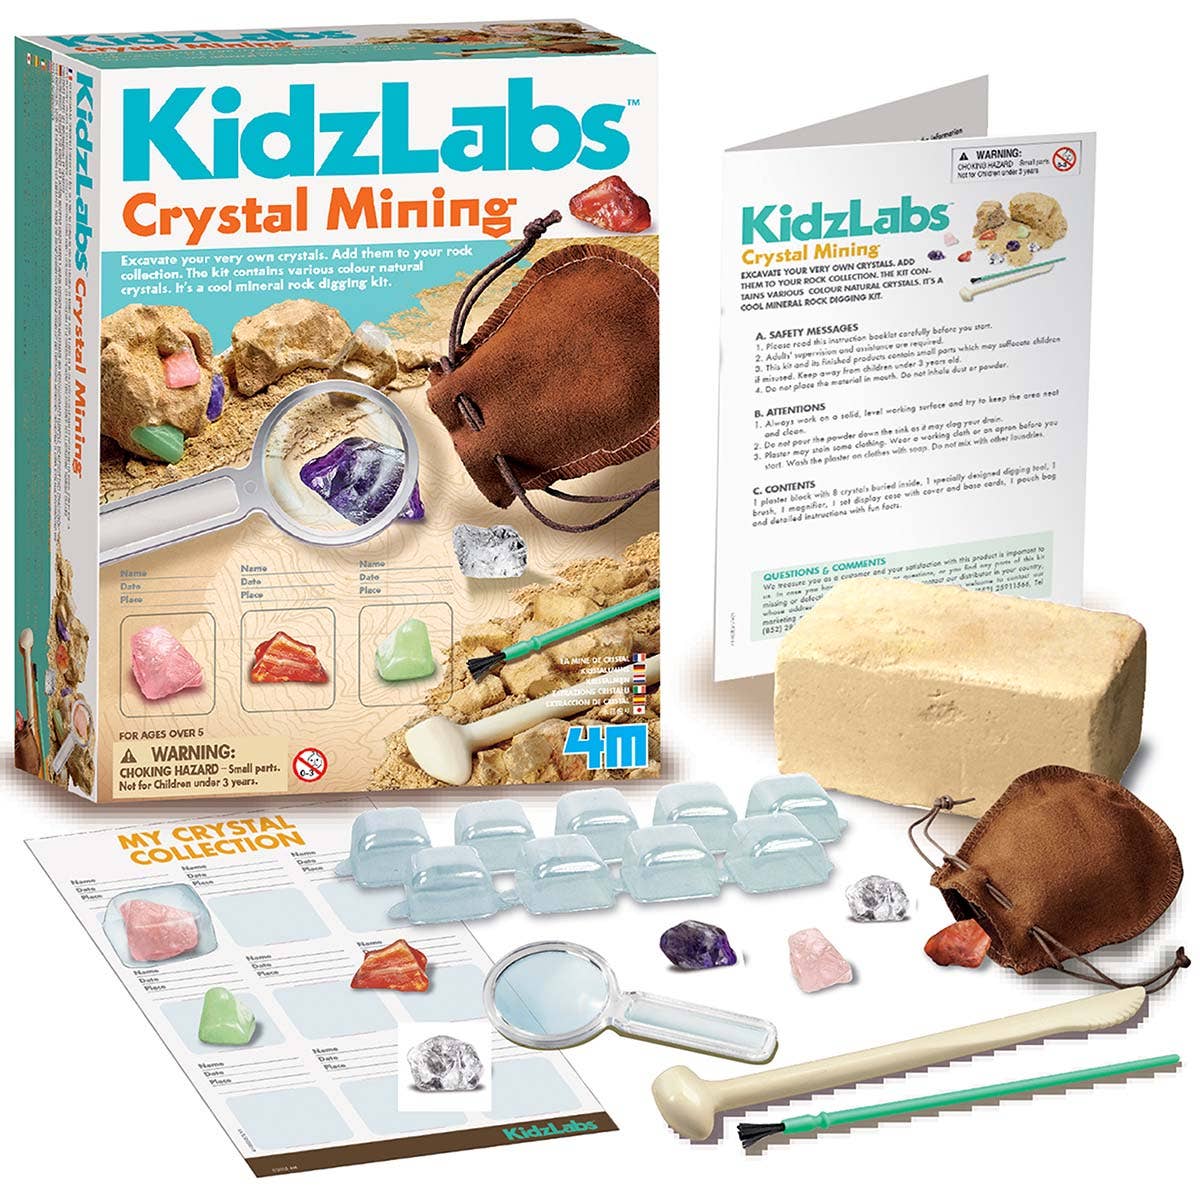 Image showing the materials included in the Crystal Mining Kit.